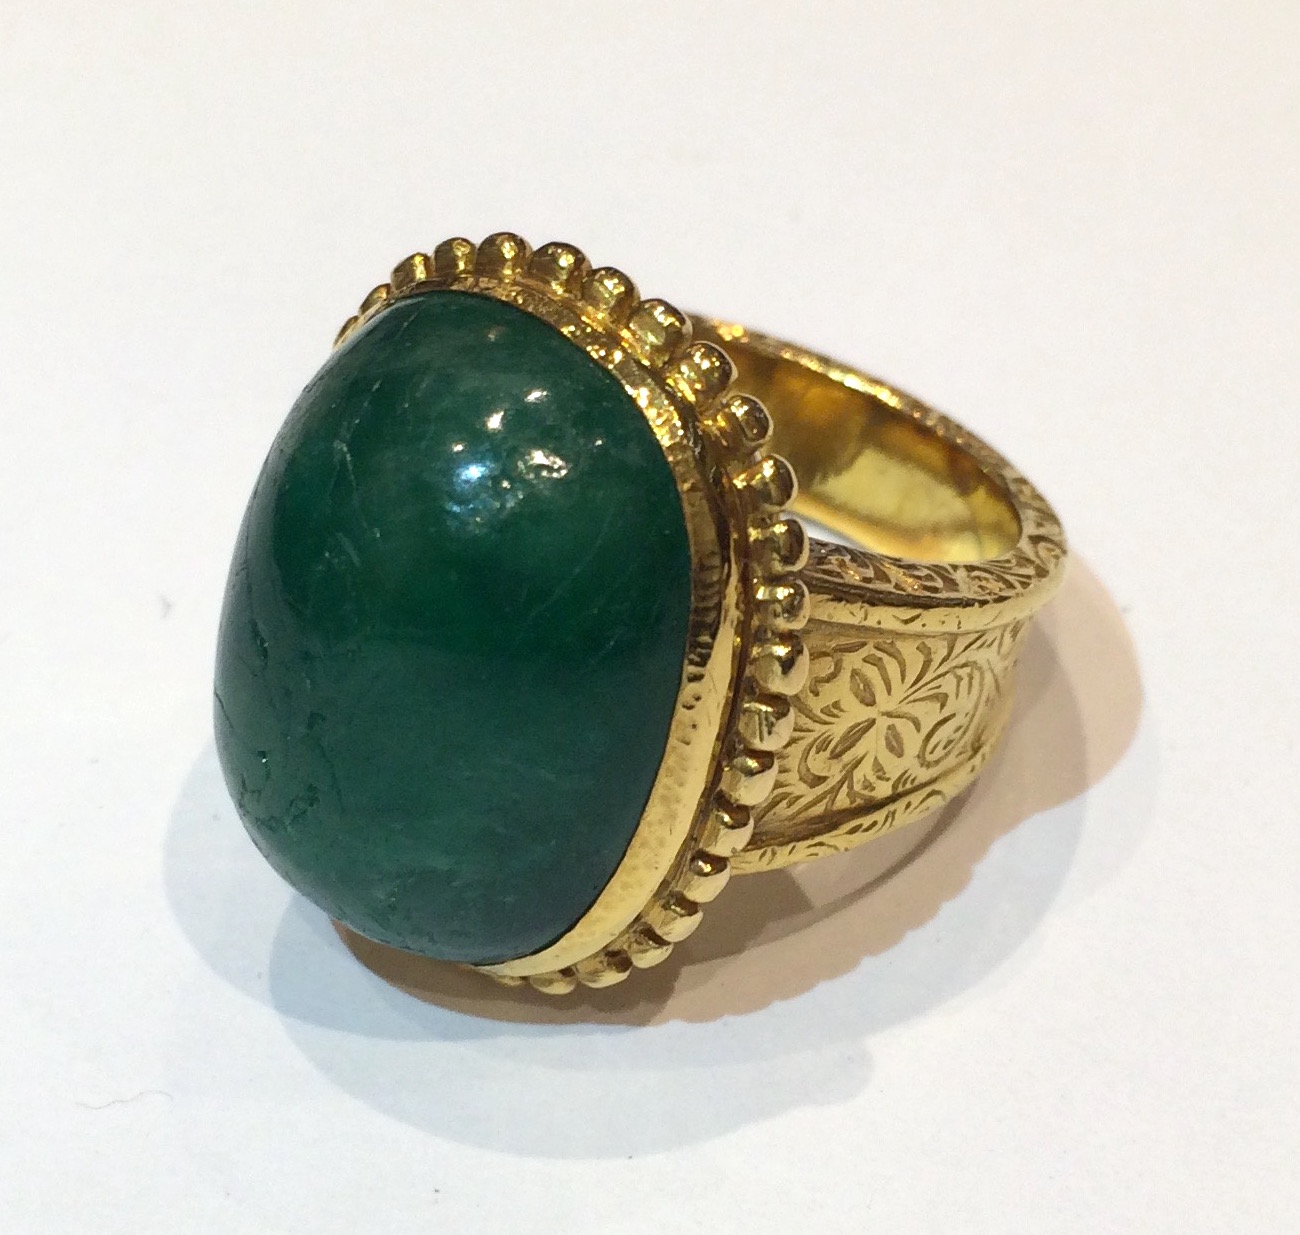 Bhutan natural large cabochon emerald ring (approx. 37 carats TW, G.I.A Certificate, indications of clarity enhancement) in 20-22K gold with decorative incised details and a gold beaded bezel, marked, c.1900